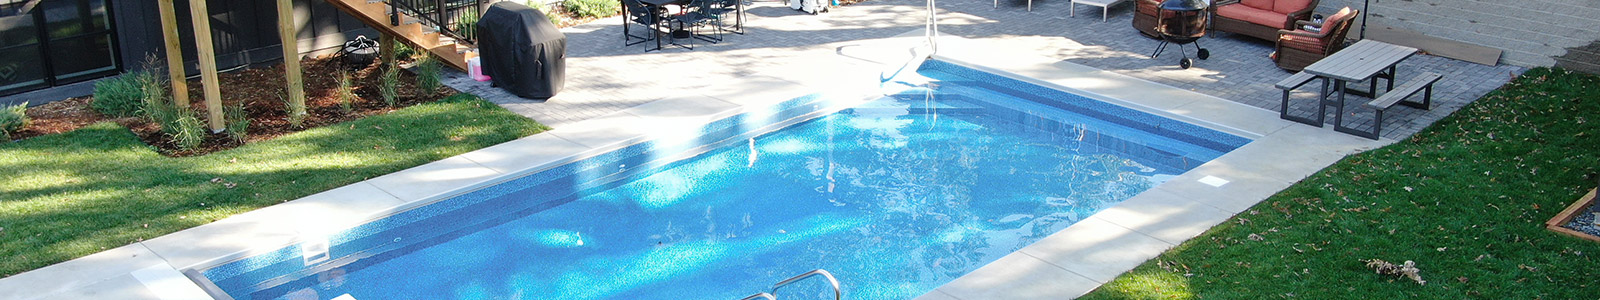 In-Ground Swimming Pool Installed by Royal Pool & Spa